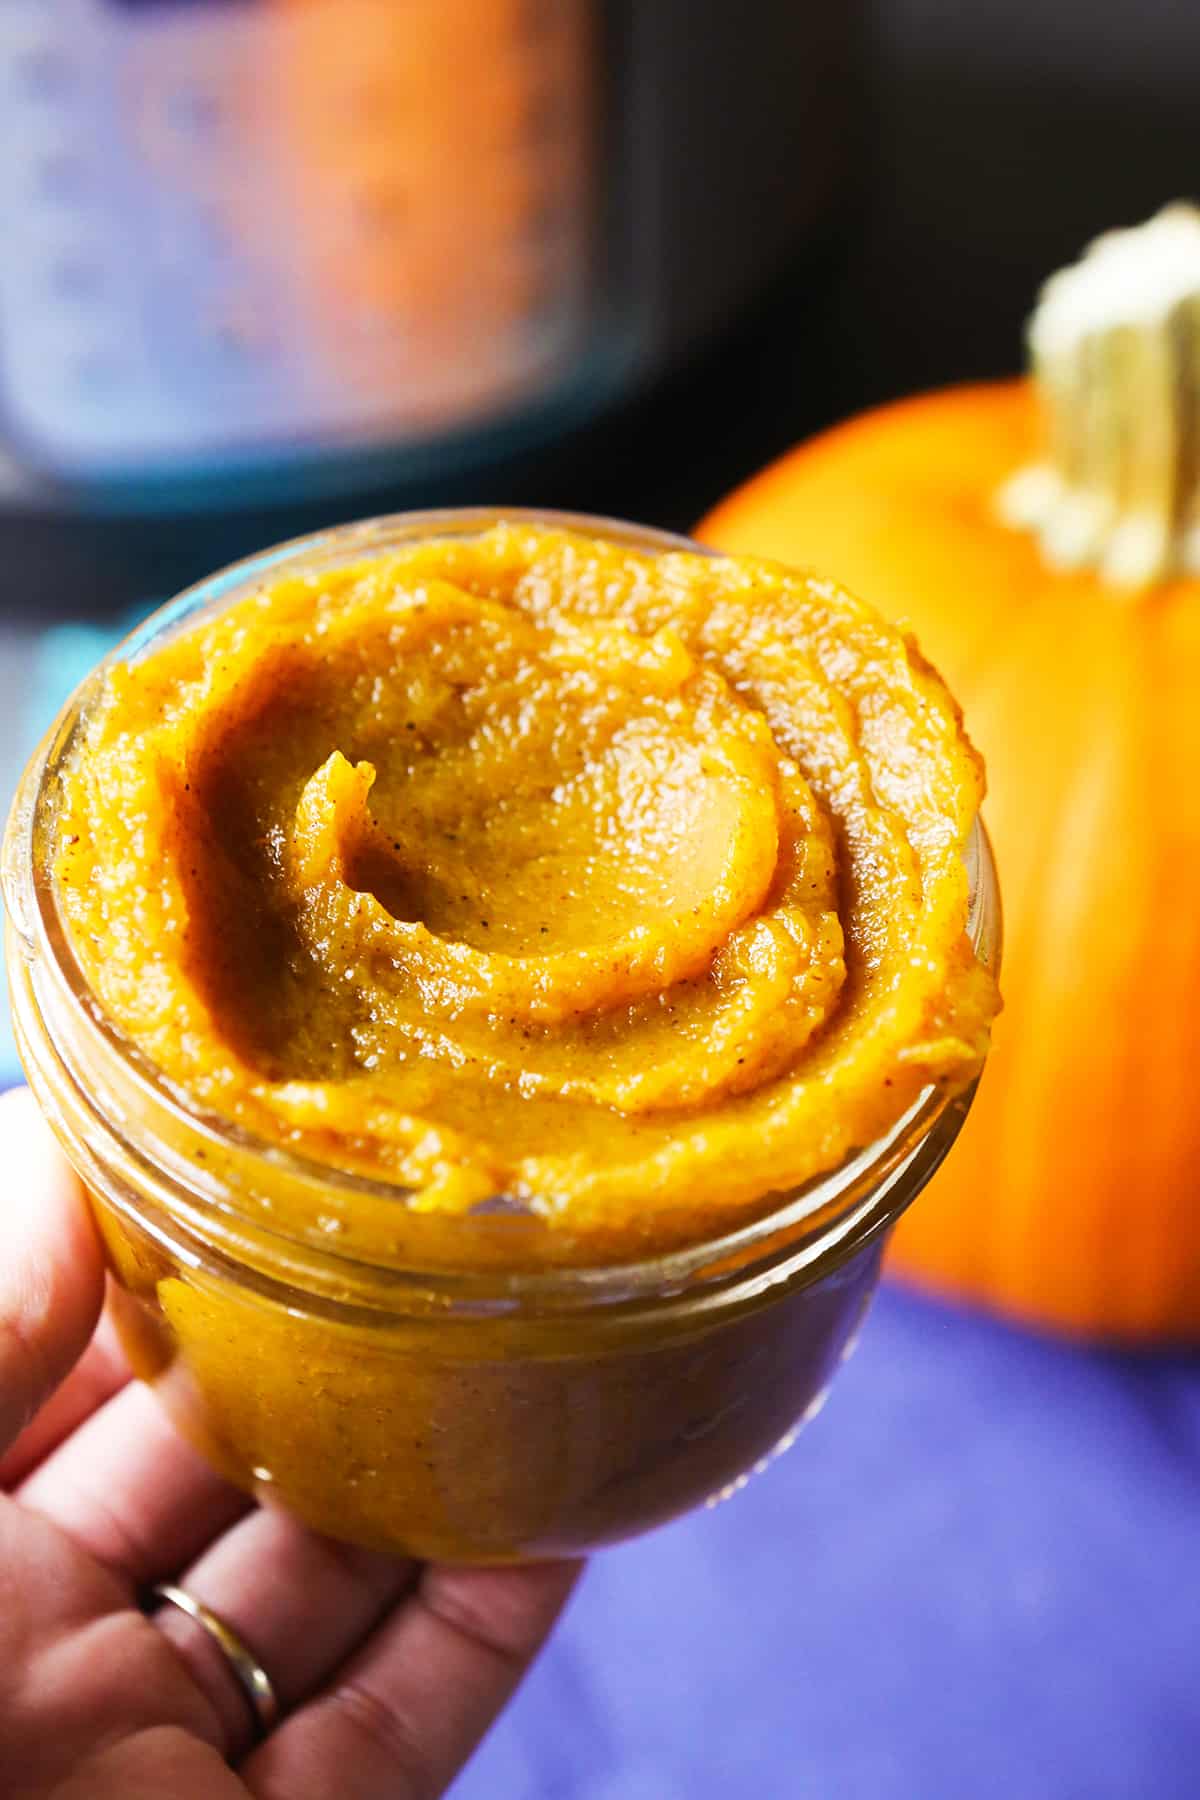 Hand holding a jar of homemade pumpkin puree, with a pumpkin and pressure cooker in the background.